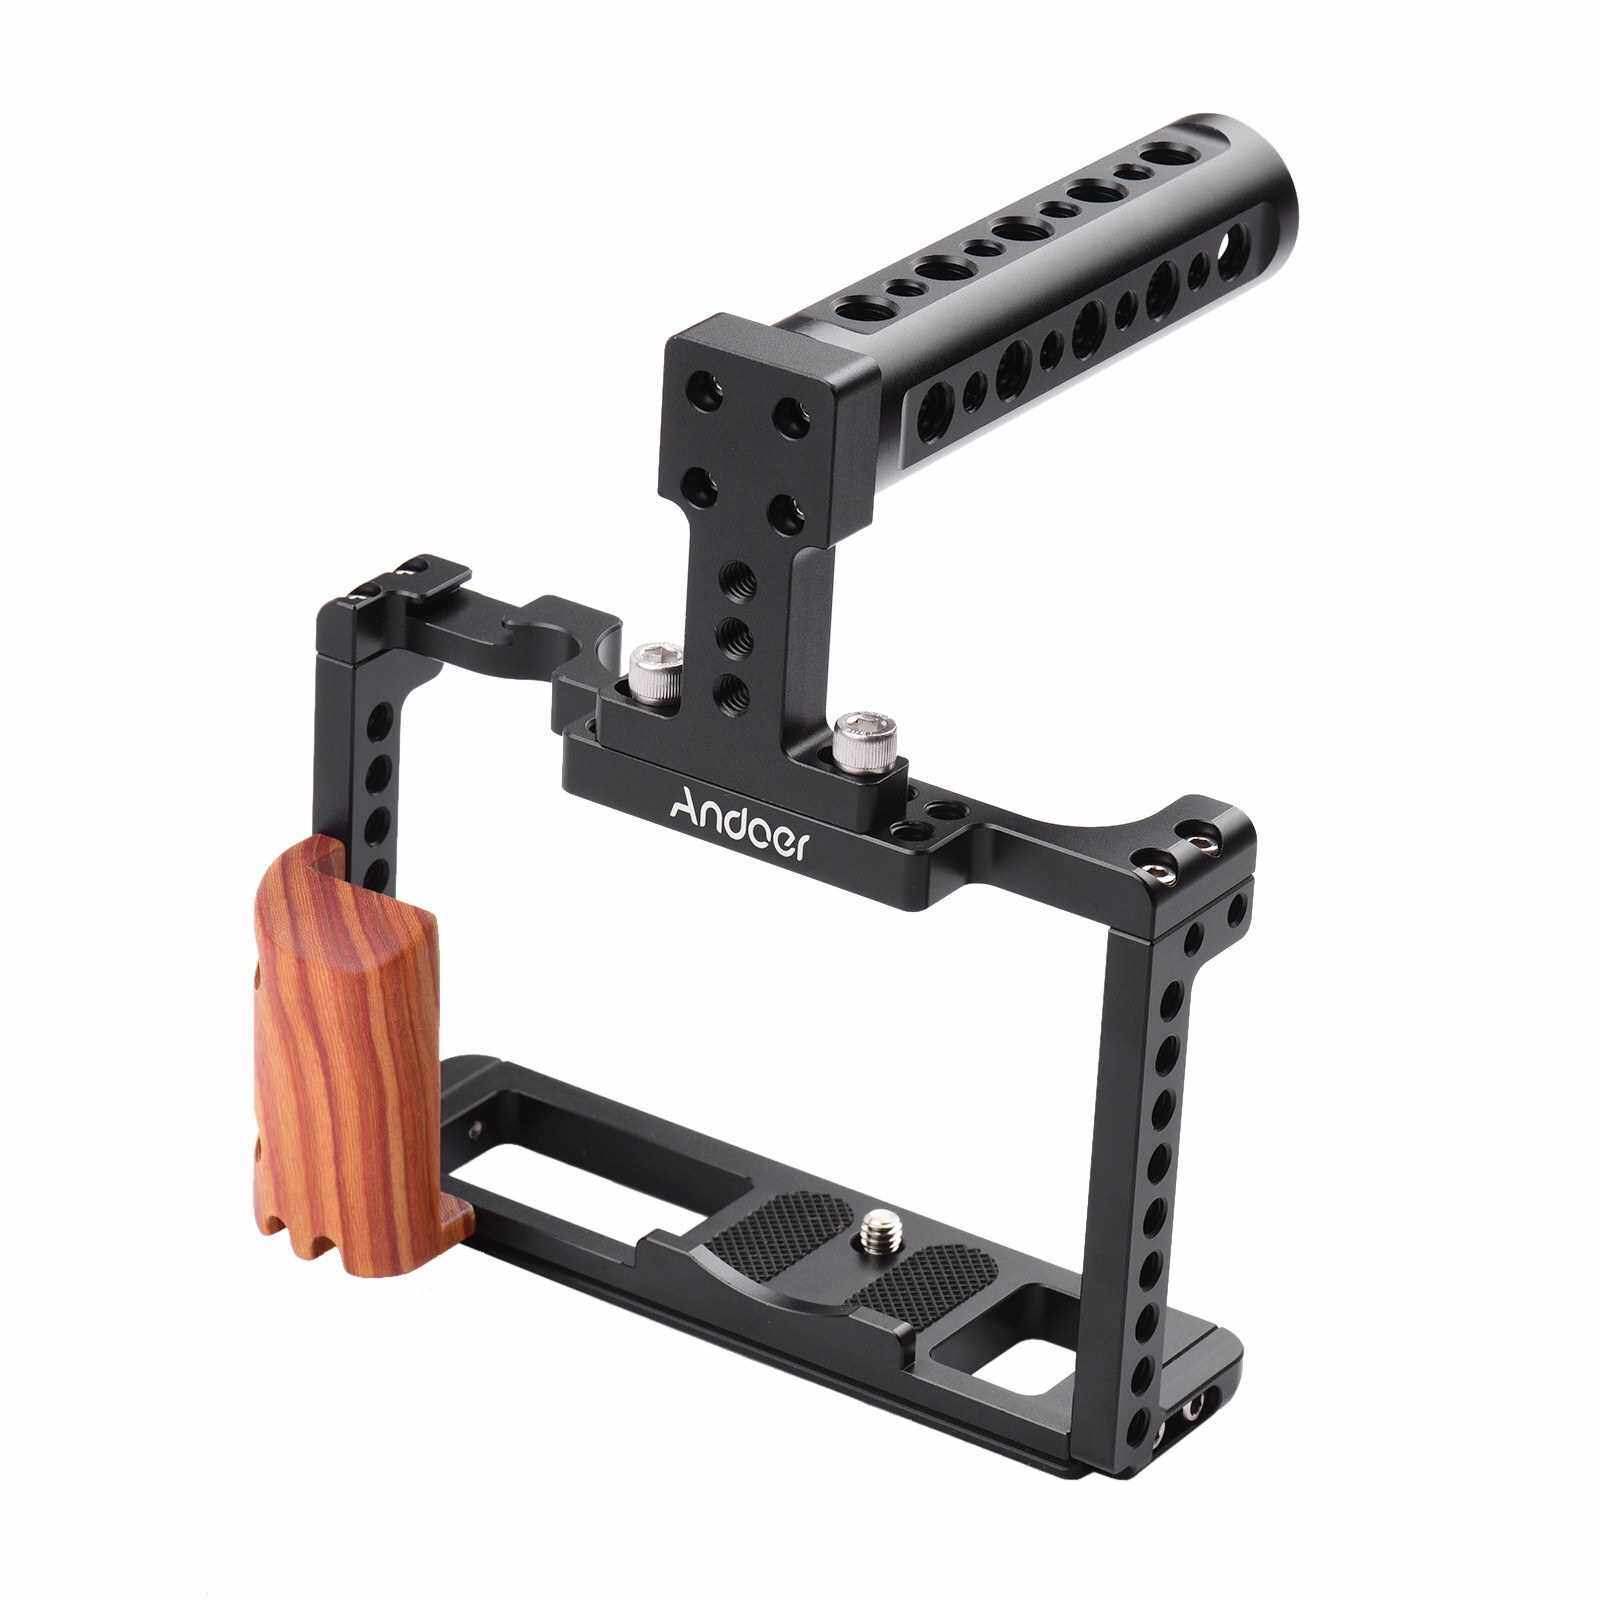 Andoer Aluminum Alloy Camera Cage Kit Protective Vlog Cage with Wooden Hand Grip Metal Top Handle Film Making System with Cold Shoe for Microphone Fill Light Compatible with Fujifilm X-T4 ILDC Camera (Standard)